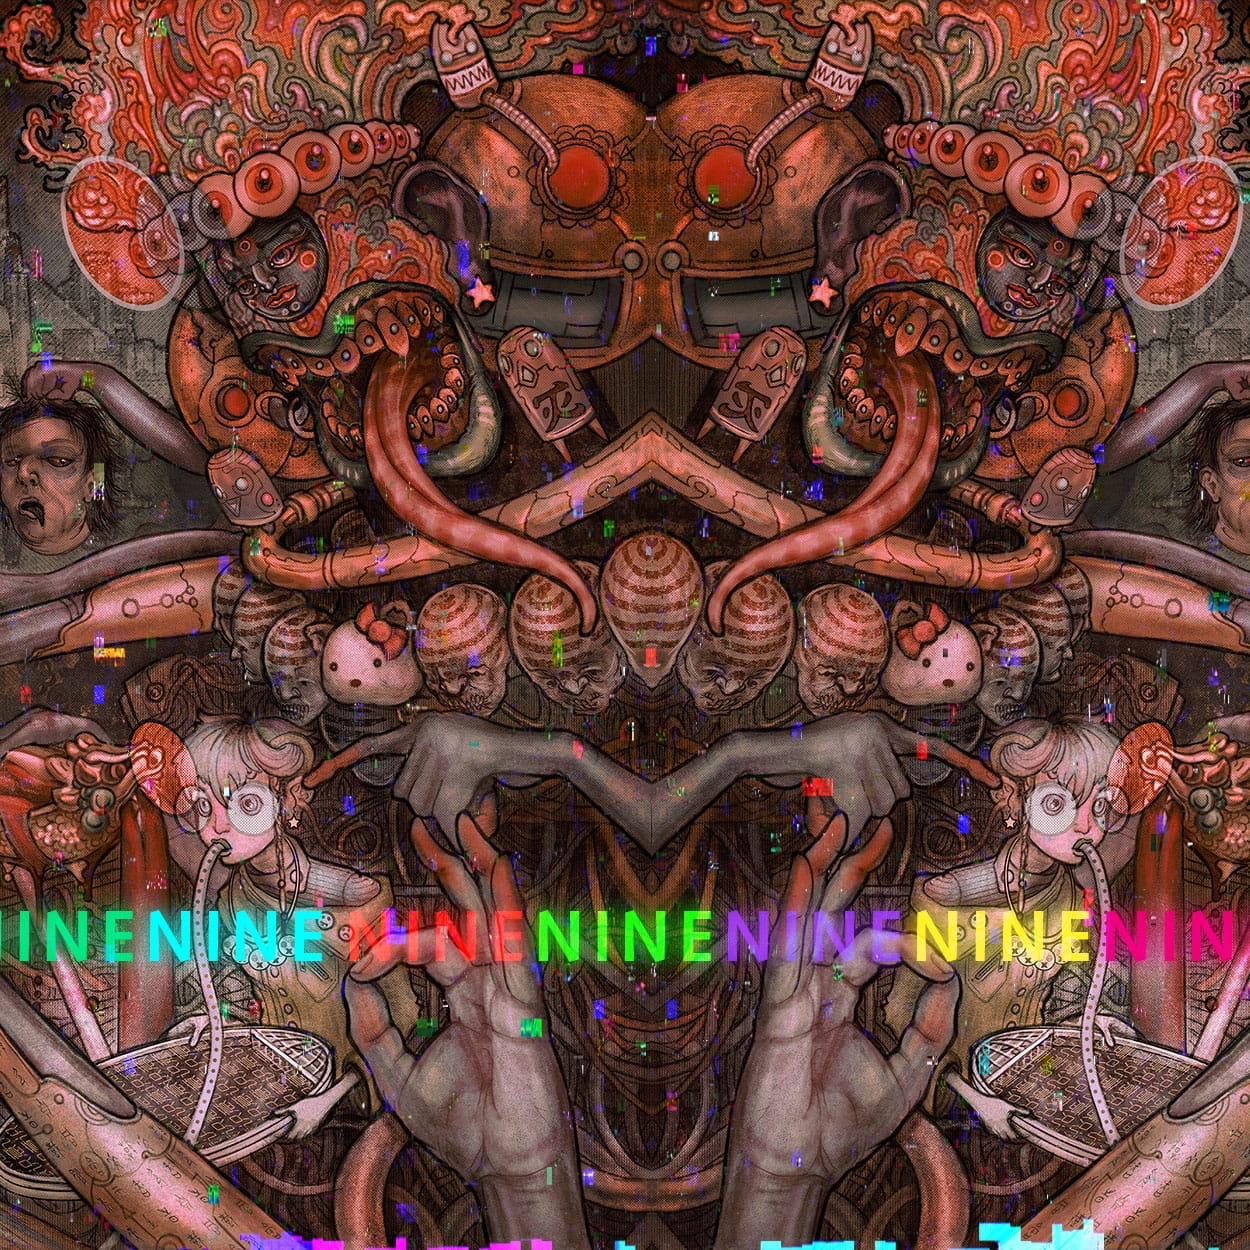 Mirror-imaged double vision of Kali and her computer-self with the word Nine repeated across the bottom in rainbow-colored text.